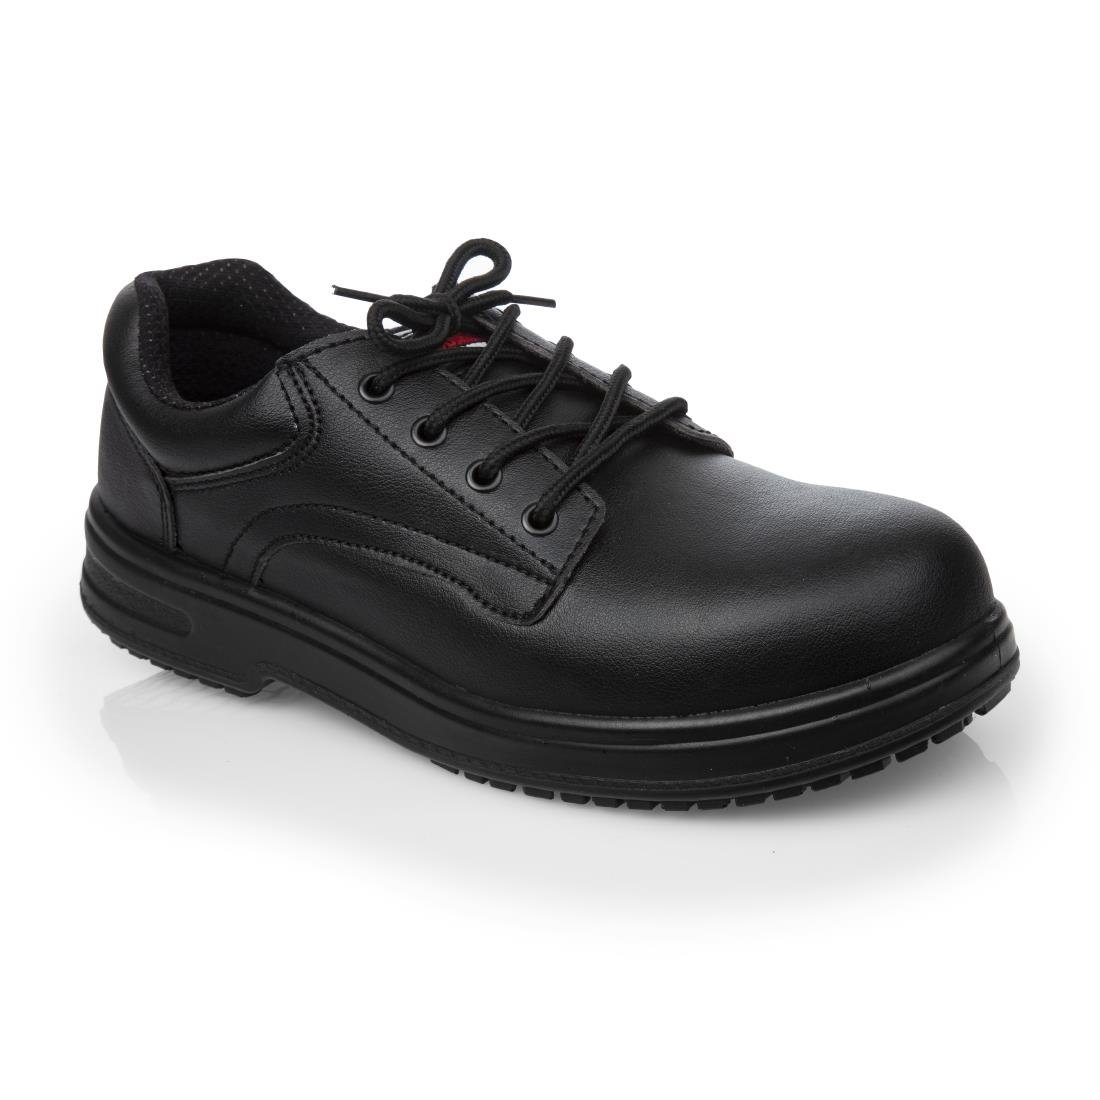 BB497-39 Slipbuster Basic Toe Cap Safety Shoes Black 39 JD Catering Equipment Solutions Ltd